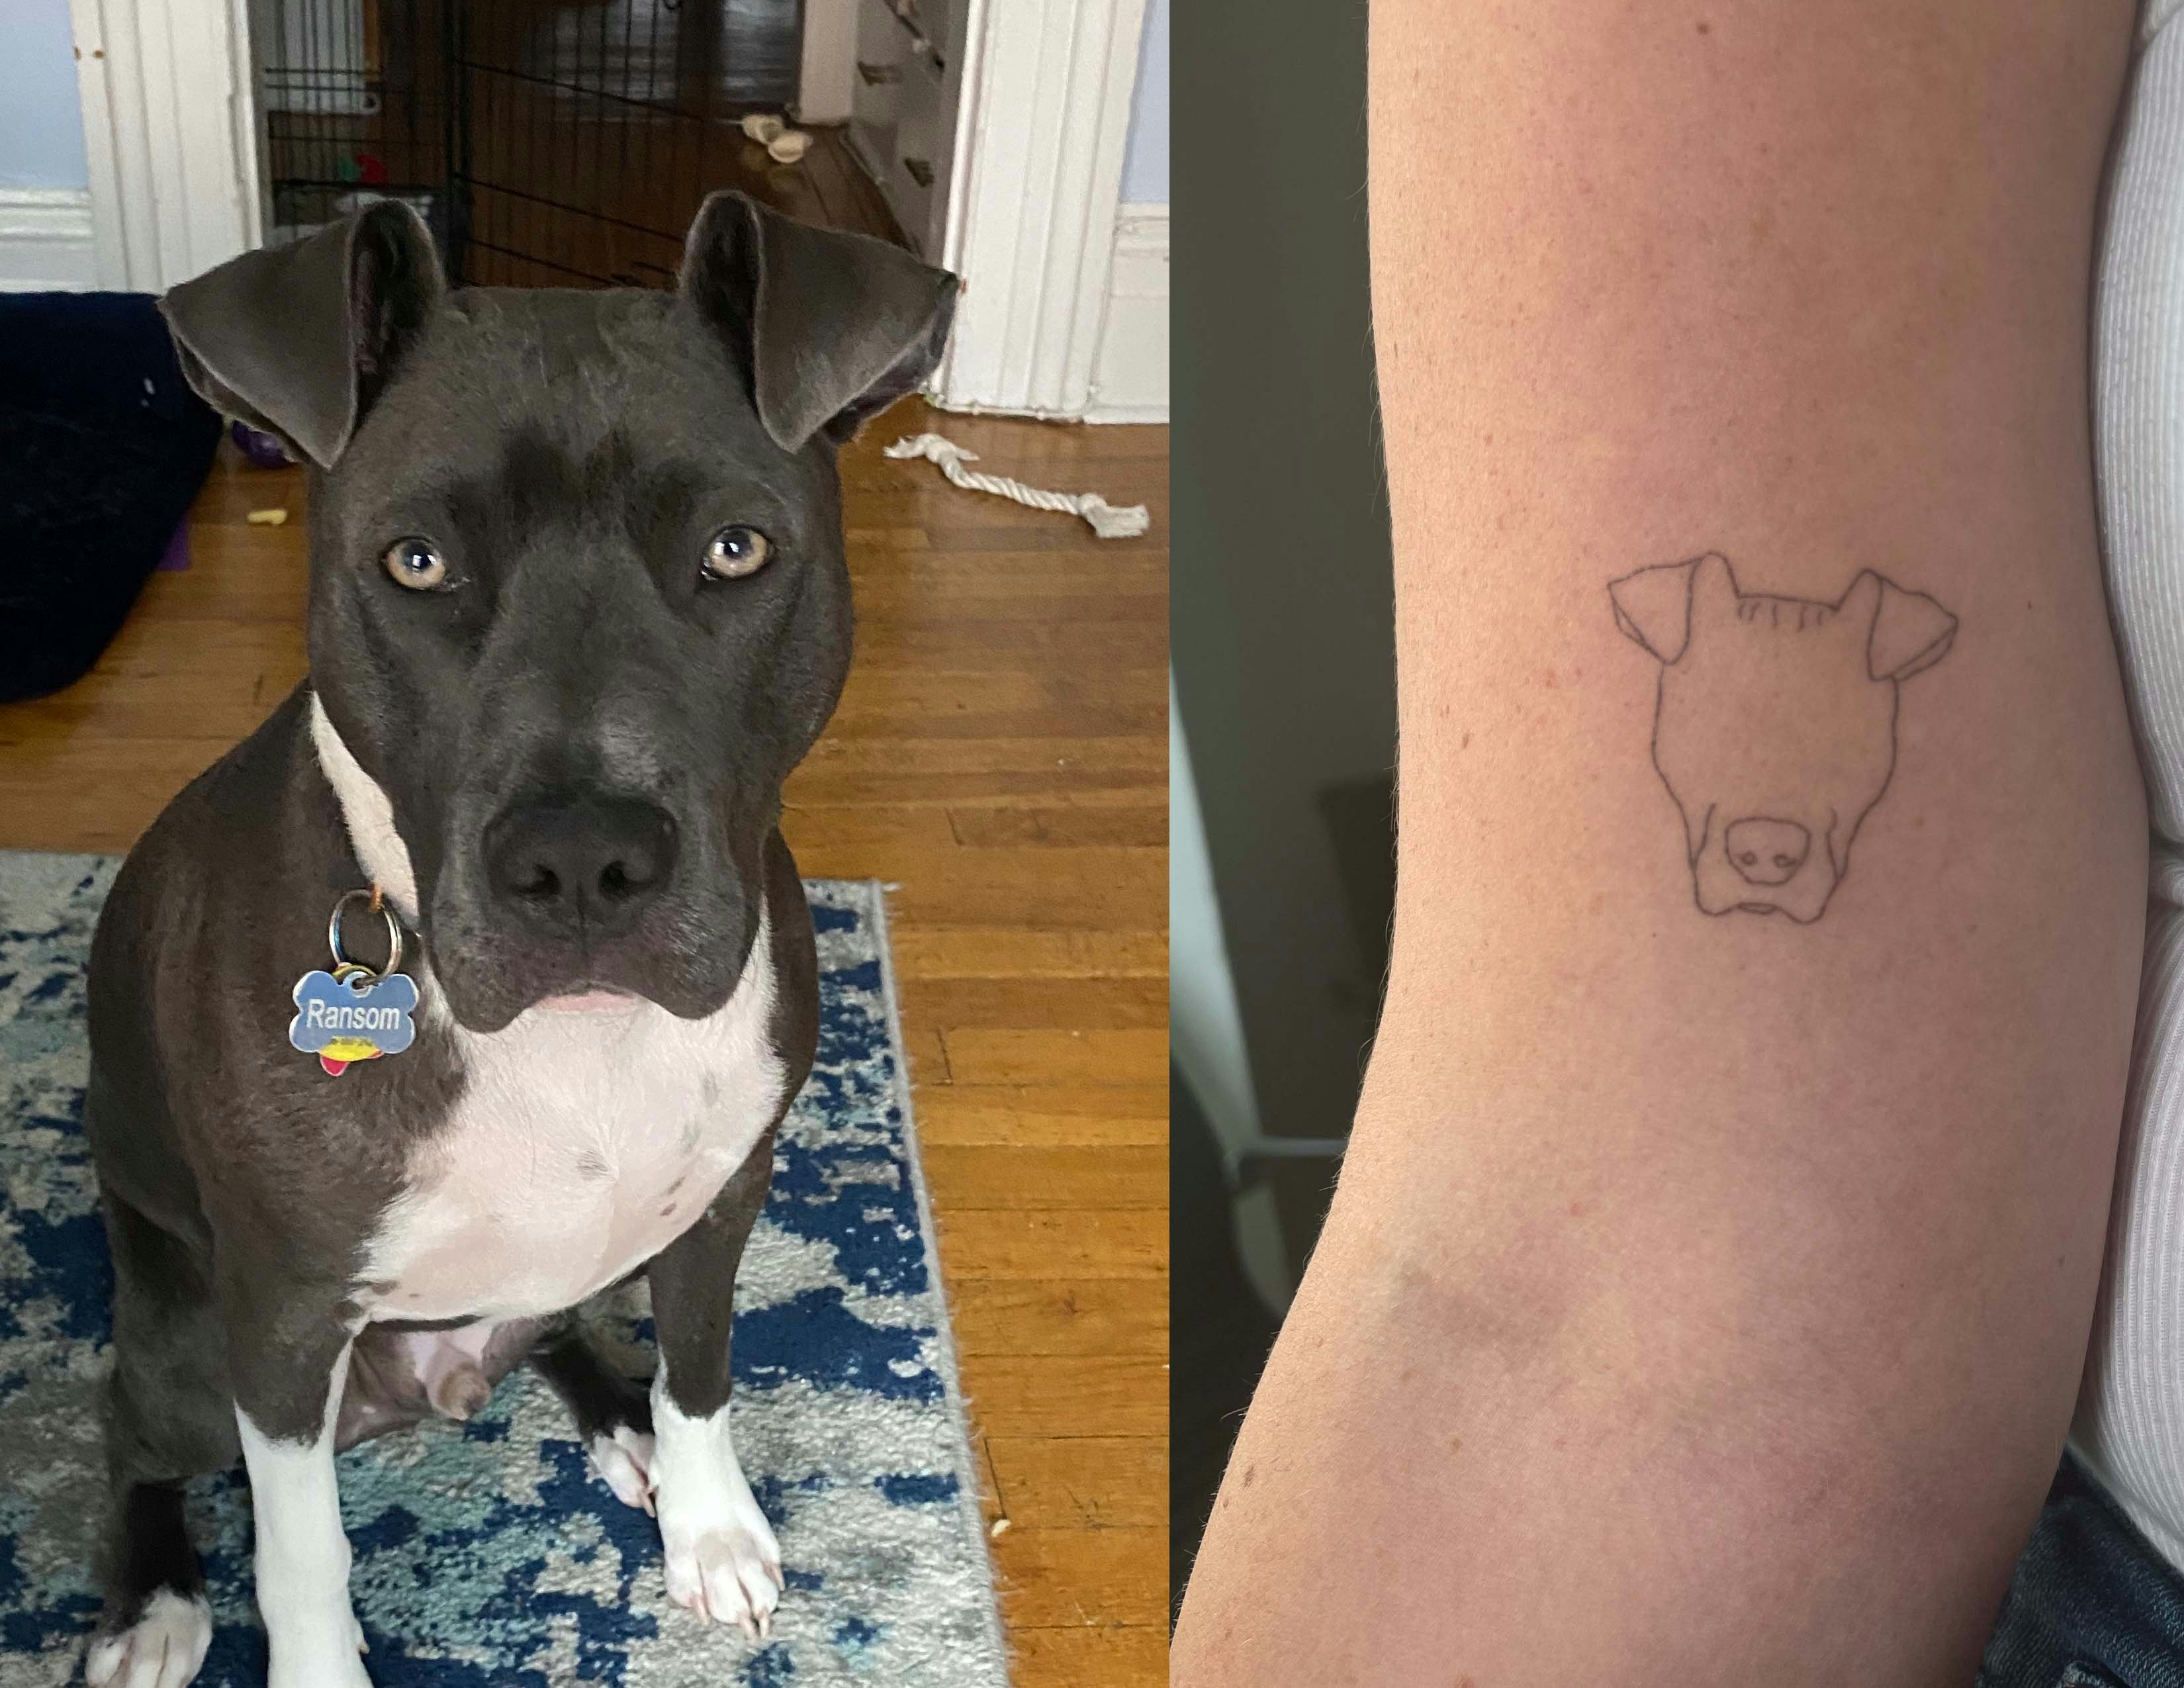 The Best Dog Tattoo Designs Realistic Portraits to Paw Prints